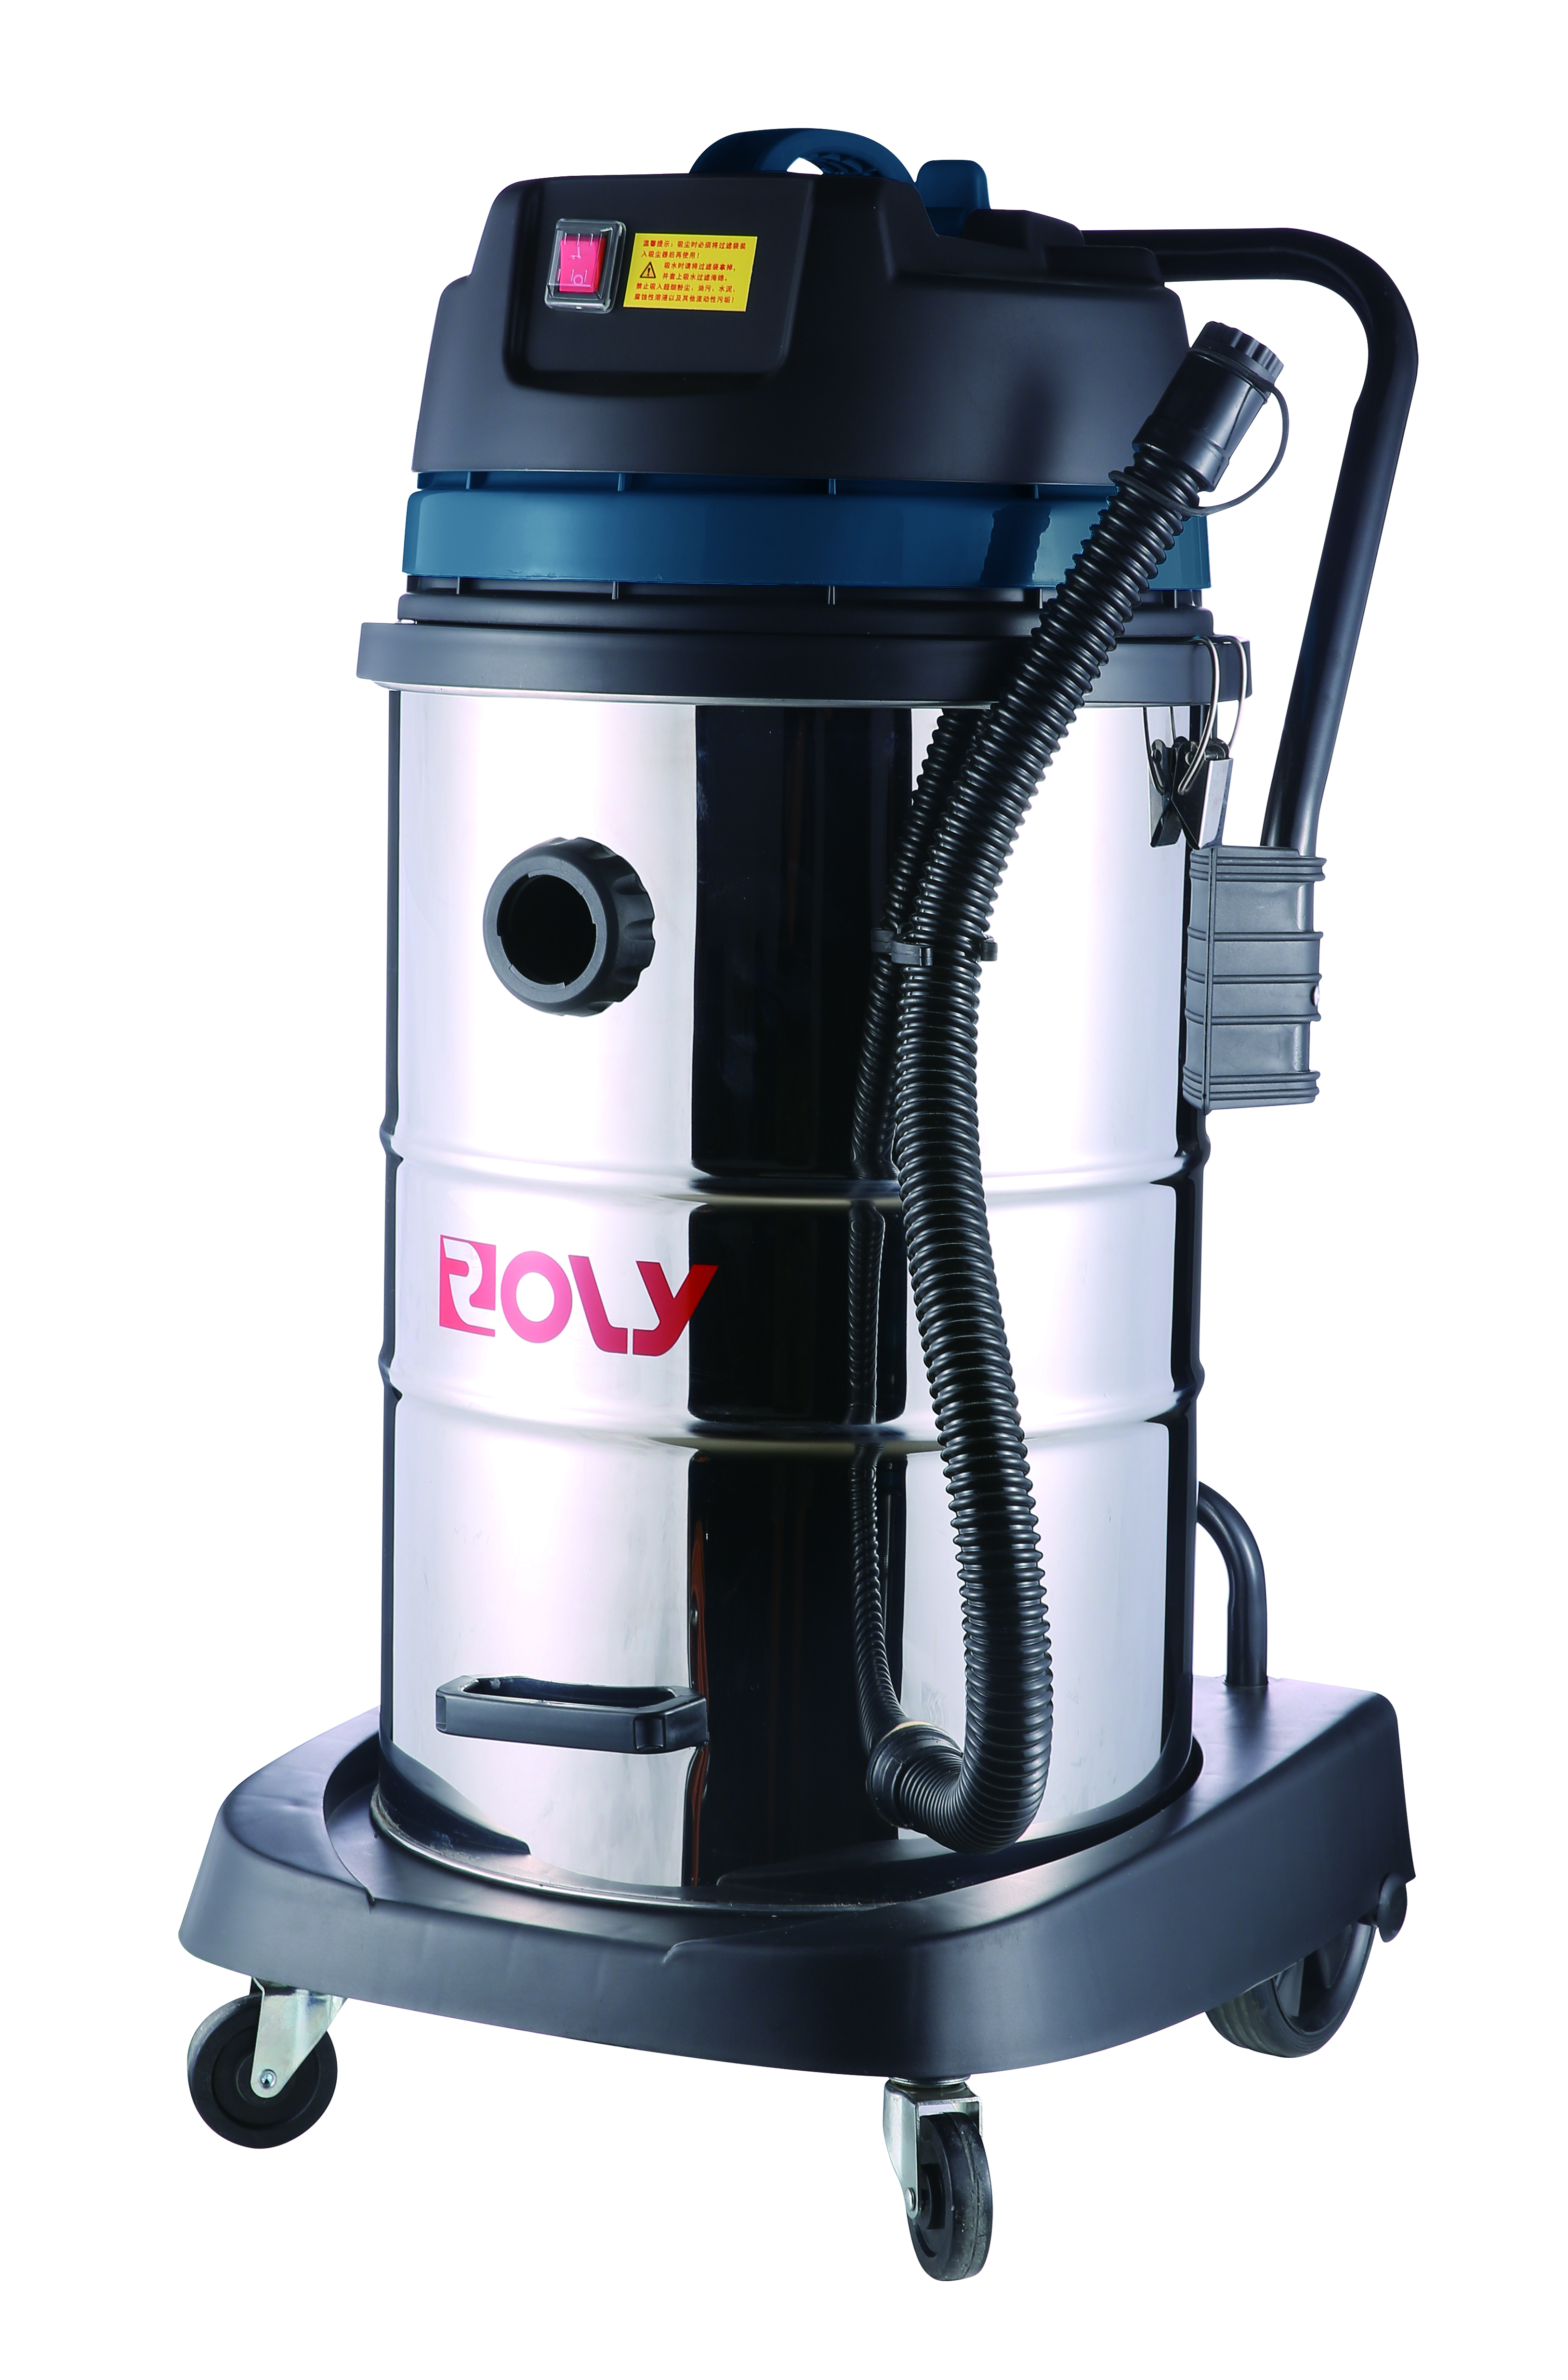 WL098 professional factory 1600W home appliance commercial wet dry industrial vacuum cleaner